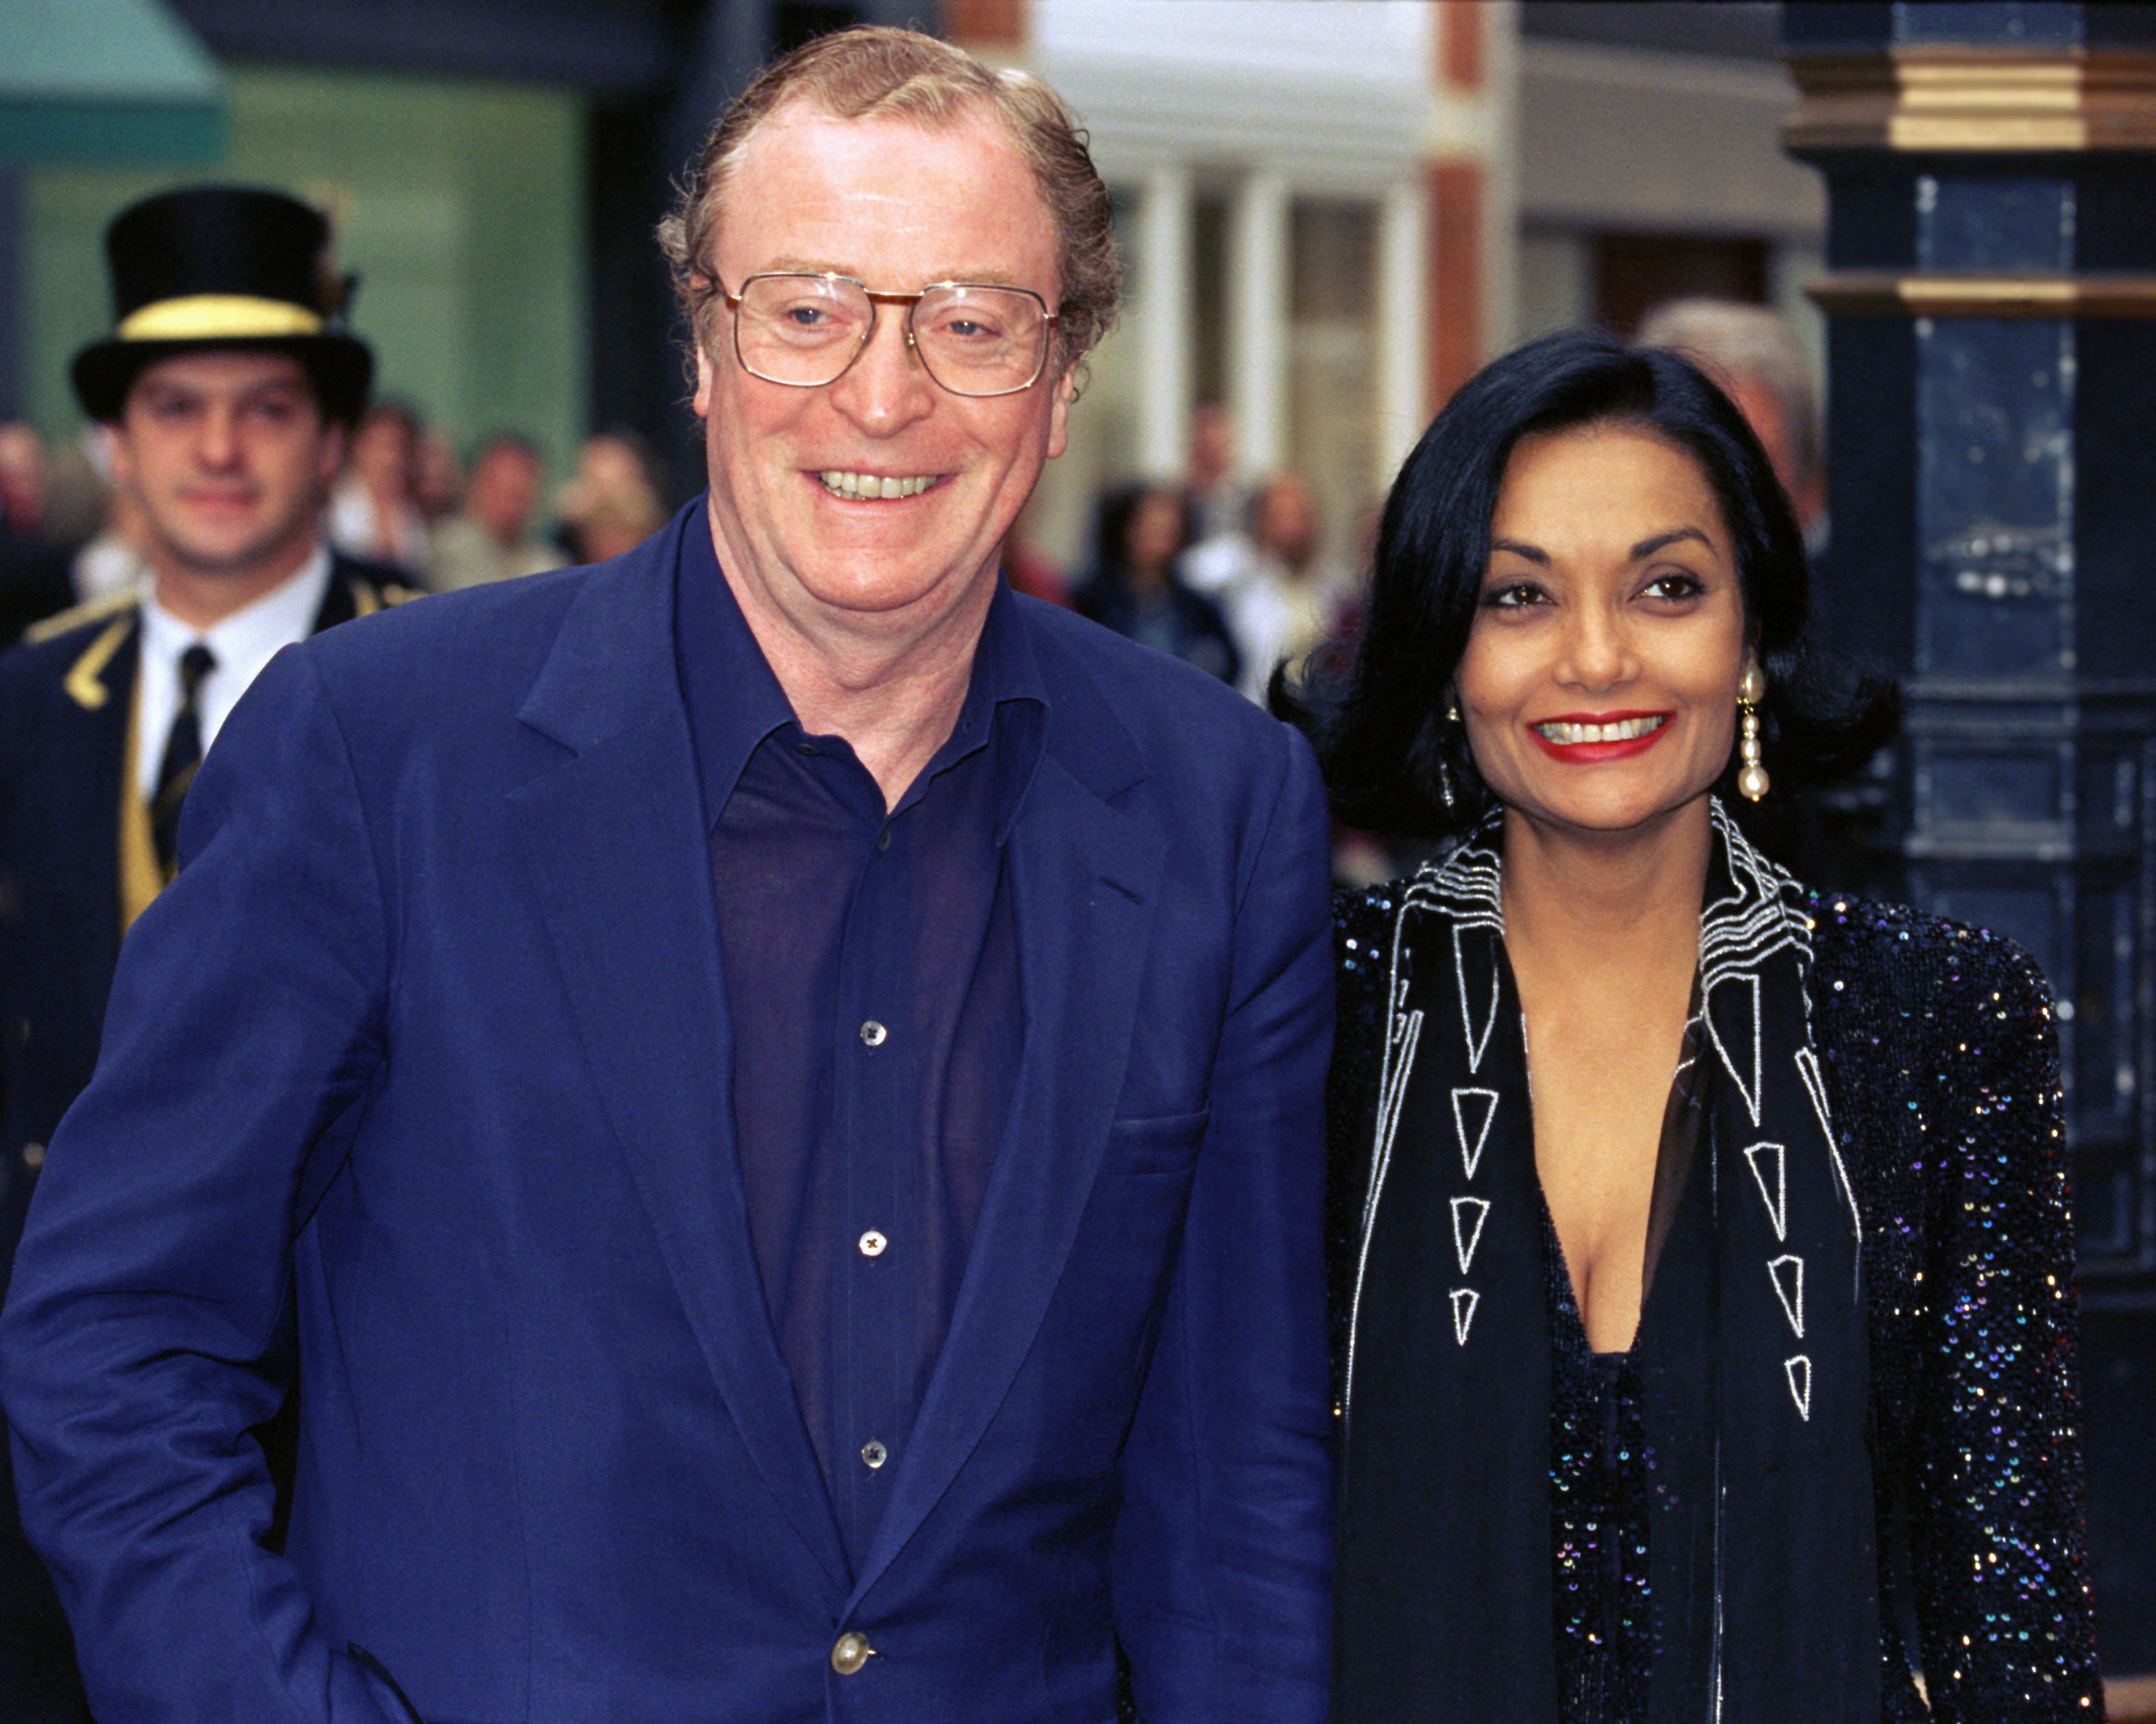 Michael & Shakira Caine attend a Gianni Versace Book Launch Party at His Store In London'S Bond Street. | Photo: Getty Images